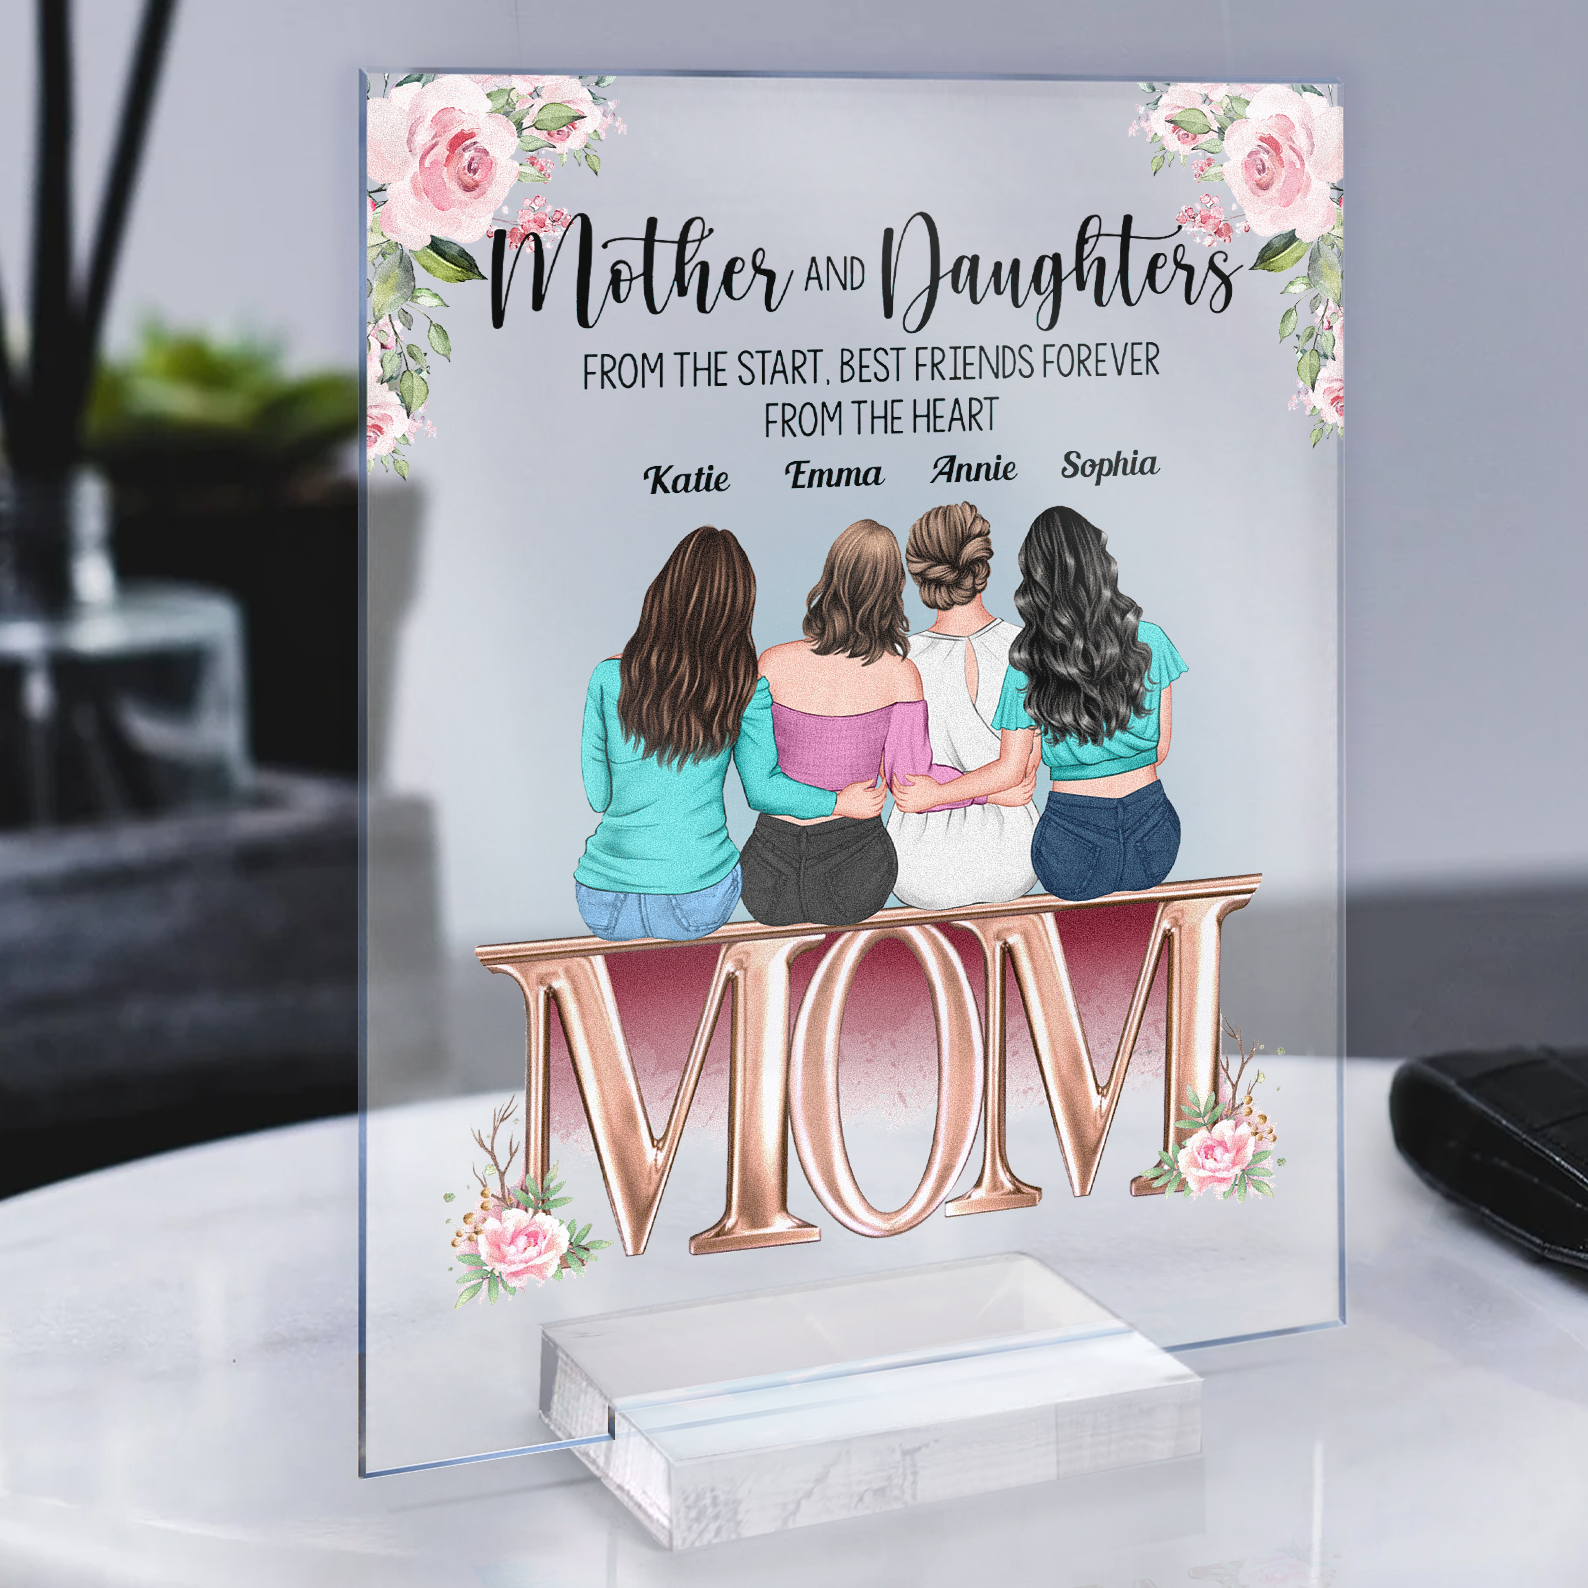 Gifts For Mother, Birthday Gifts For Mother From Daughter